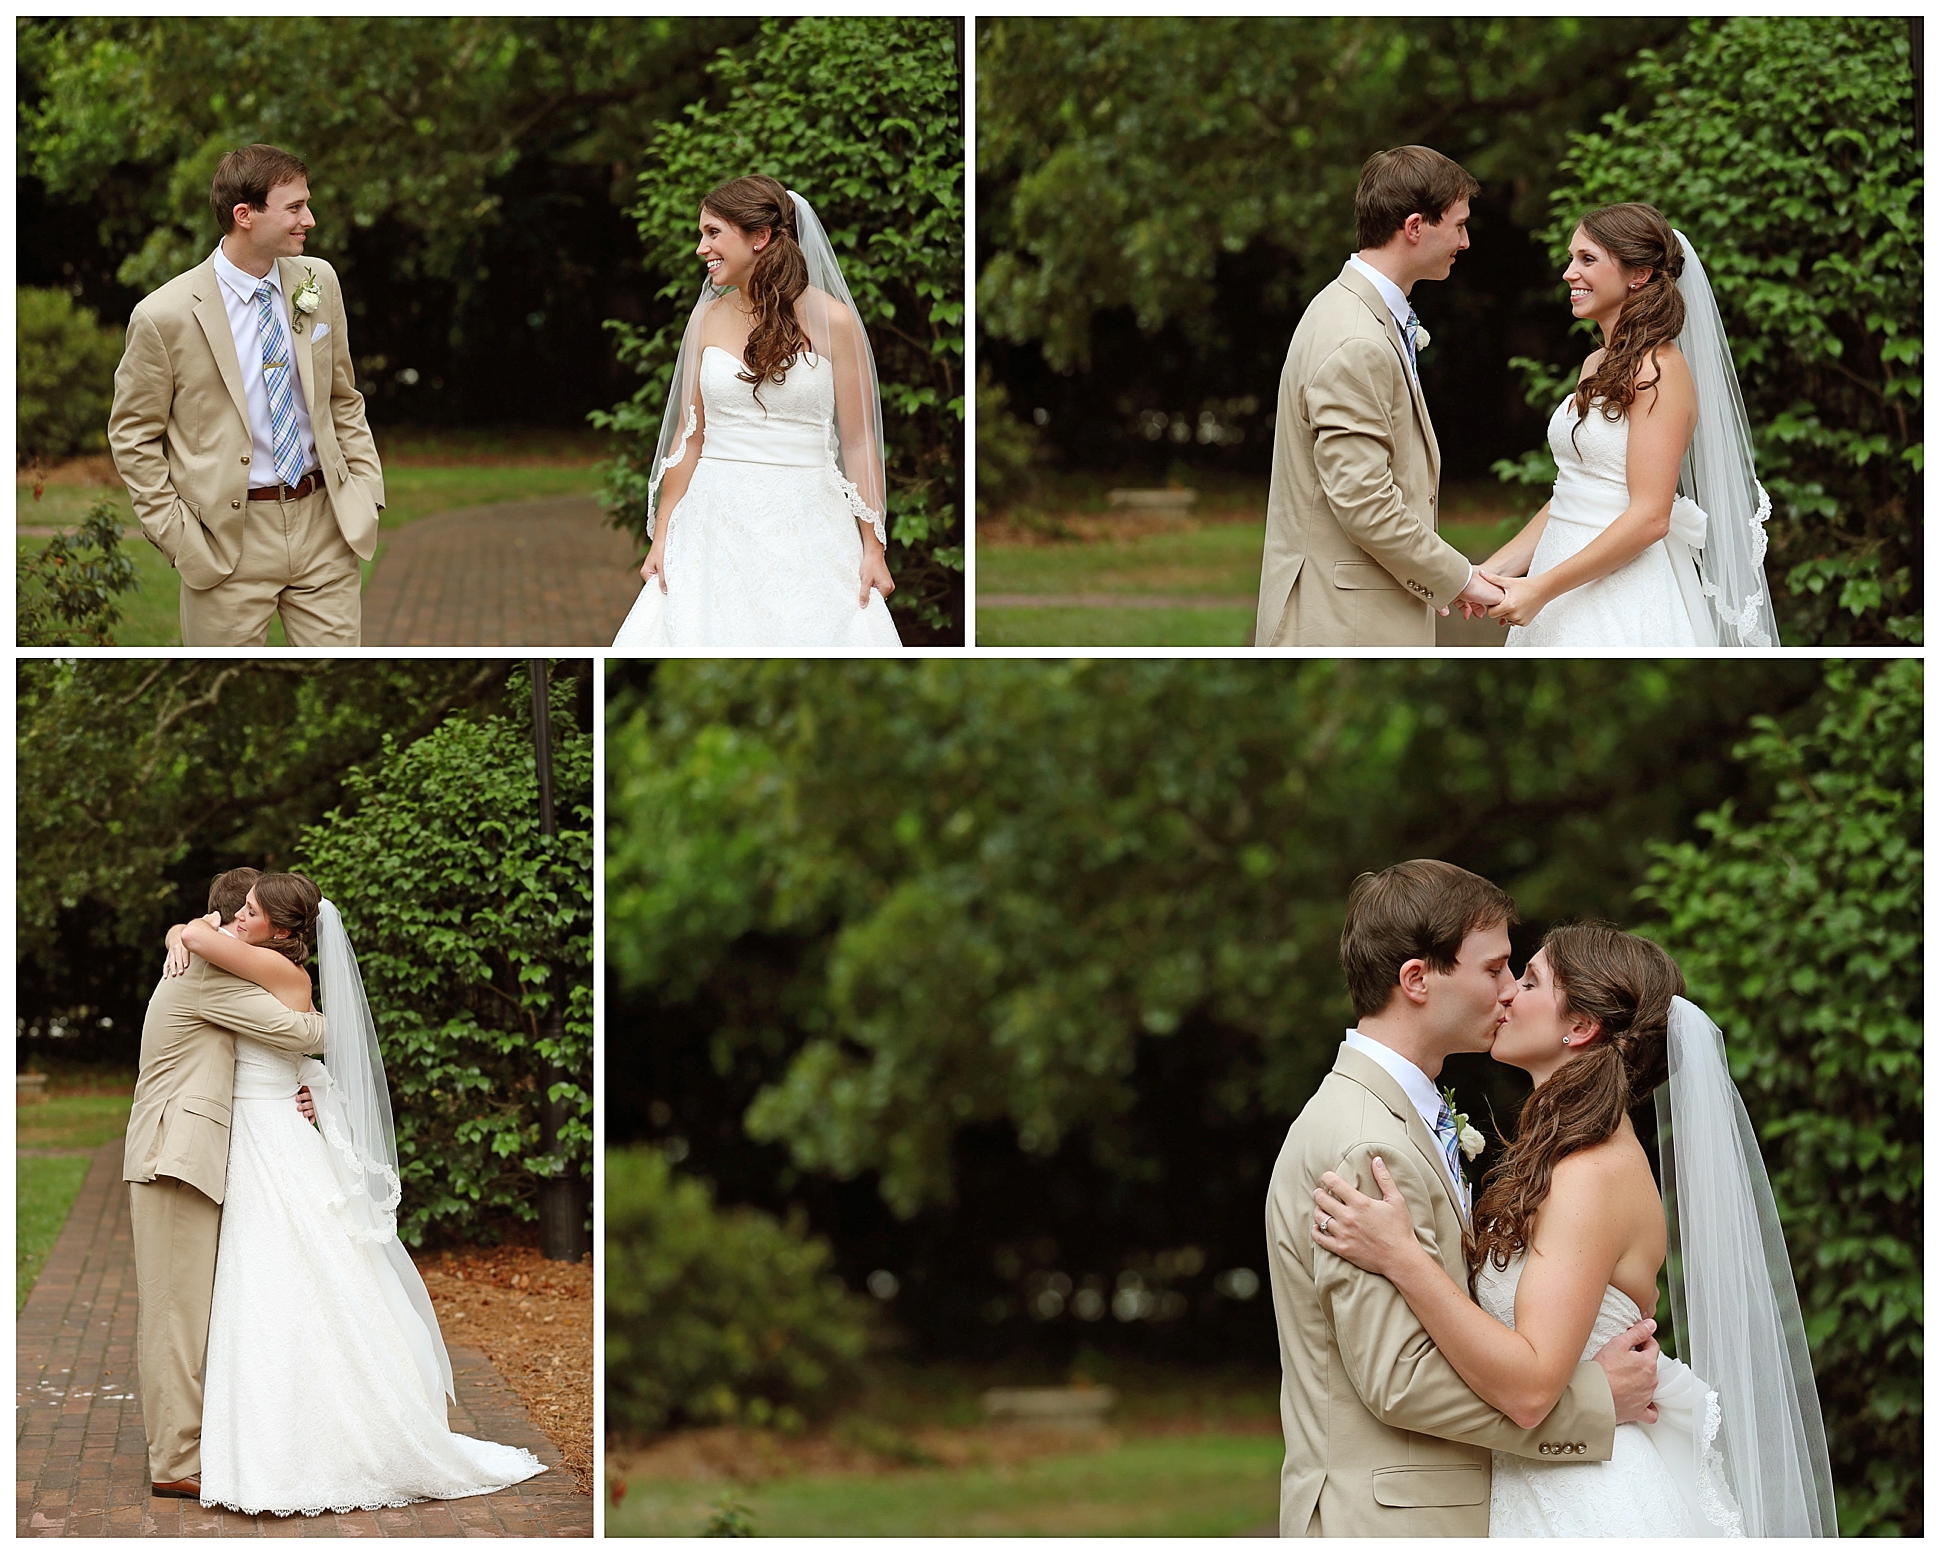 A Rustic Inspired Southern Farm Wedding | Two Chics Photography | www.twochicsphotography.com